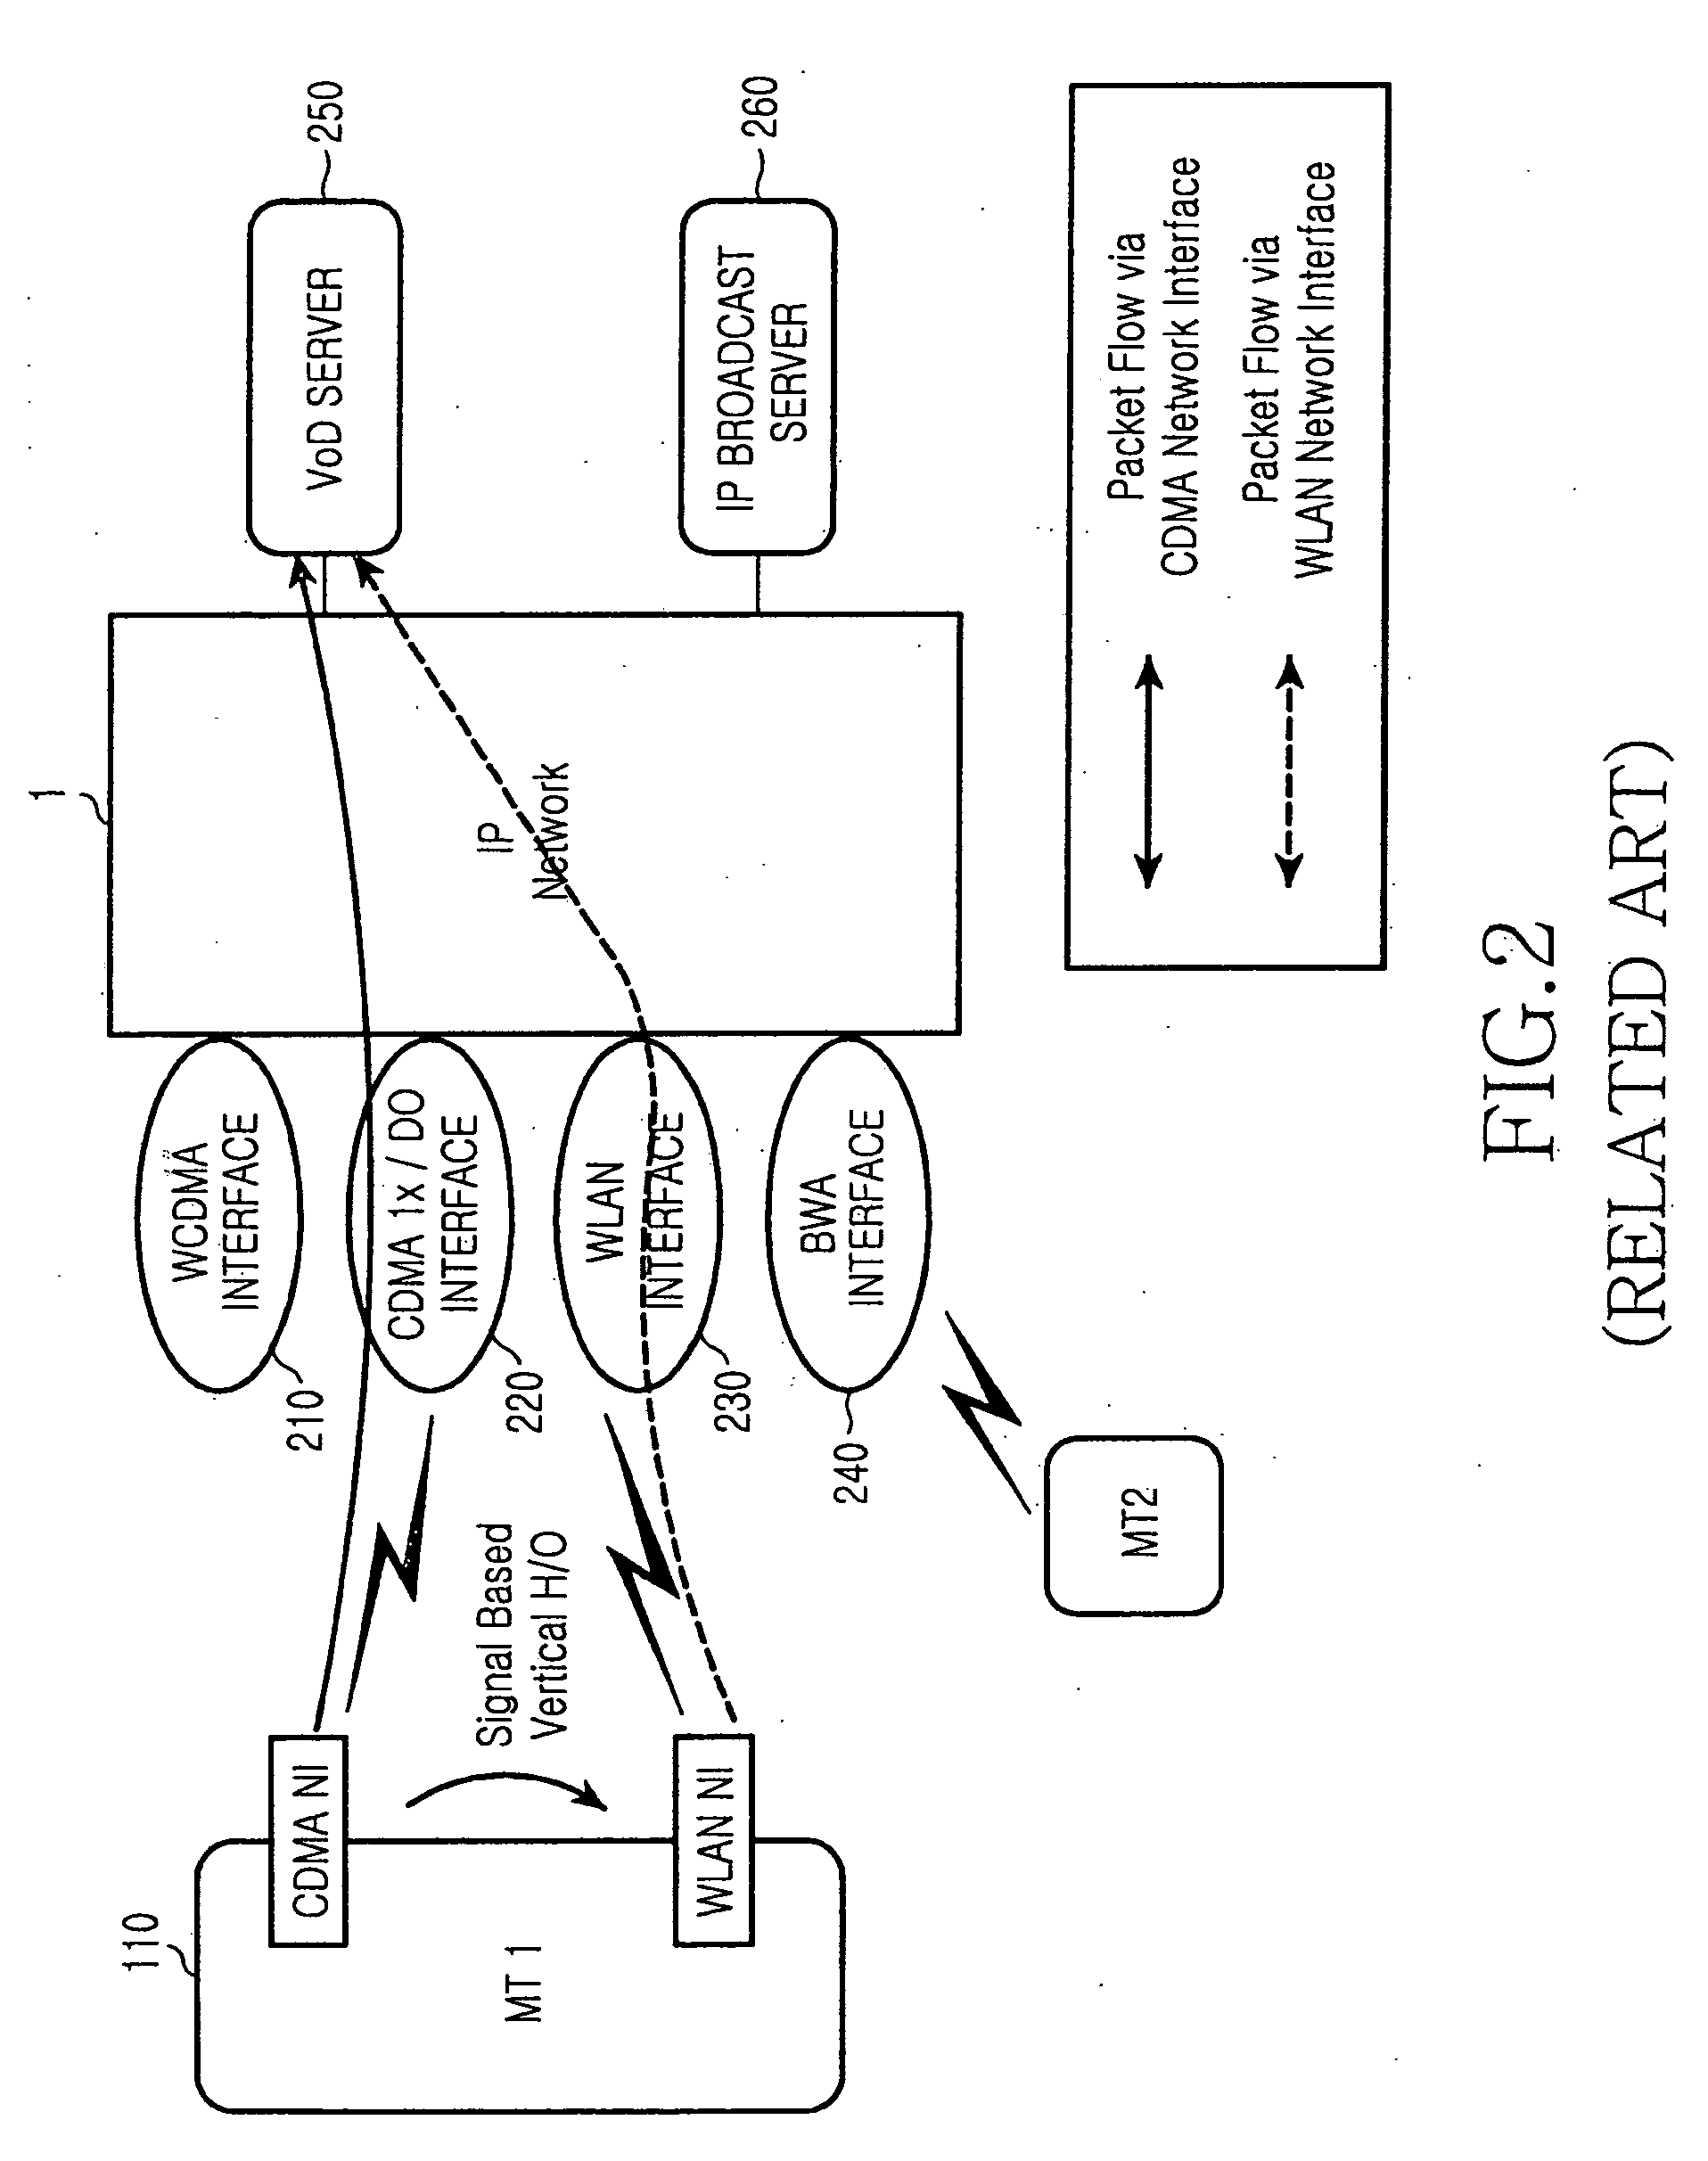 Apparatus and method for changing network interfaces in a multiaccess mobile terminal